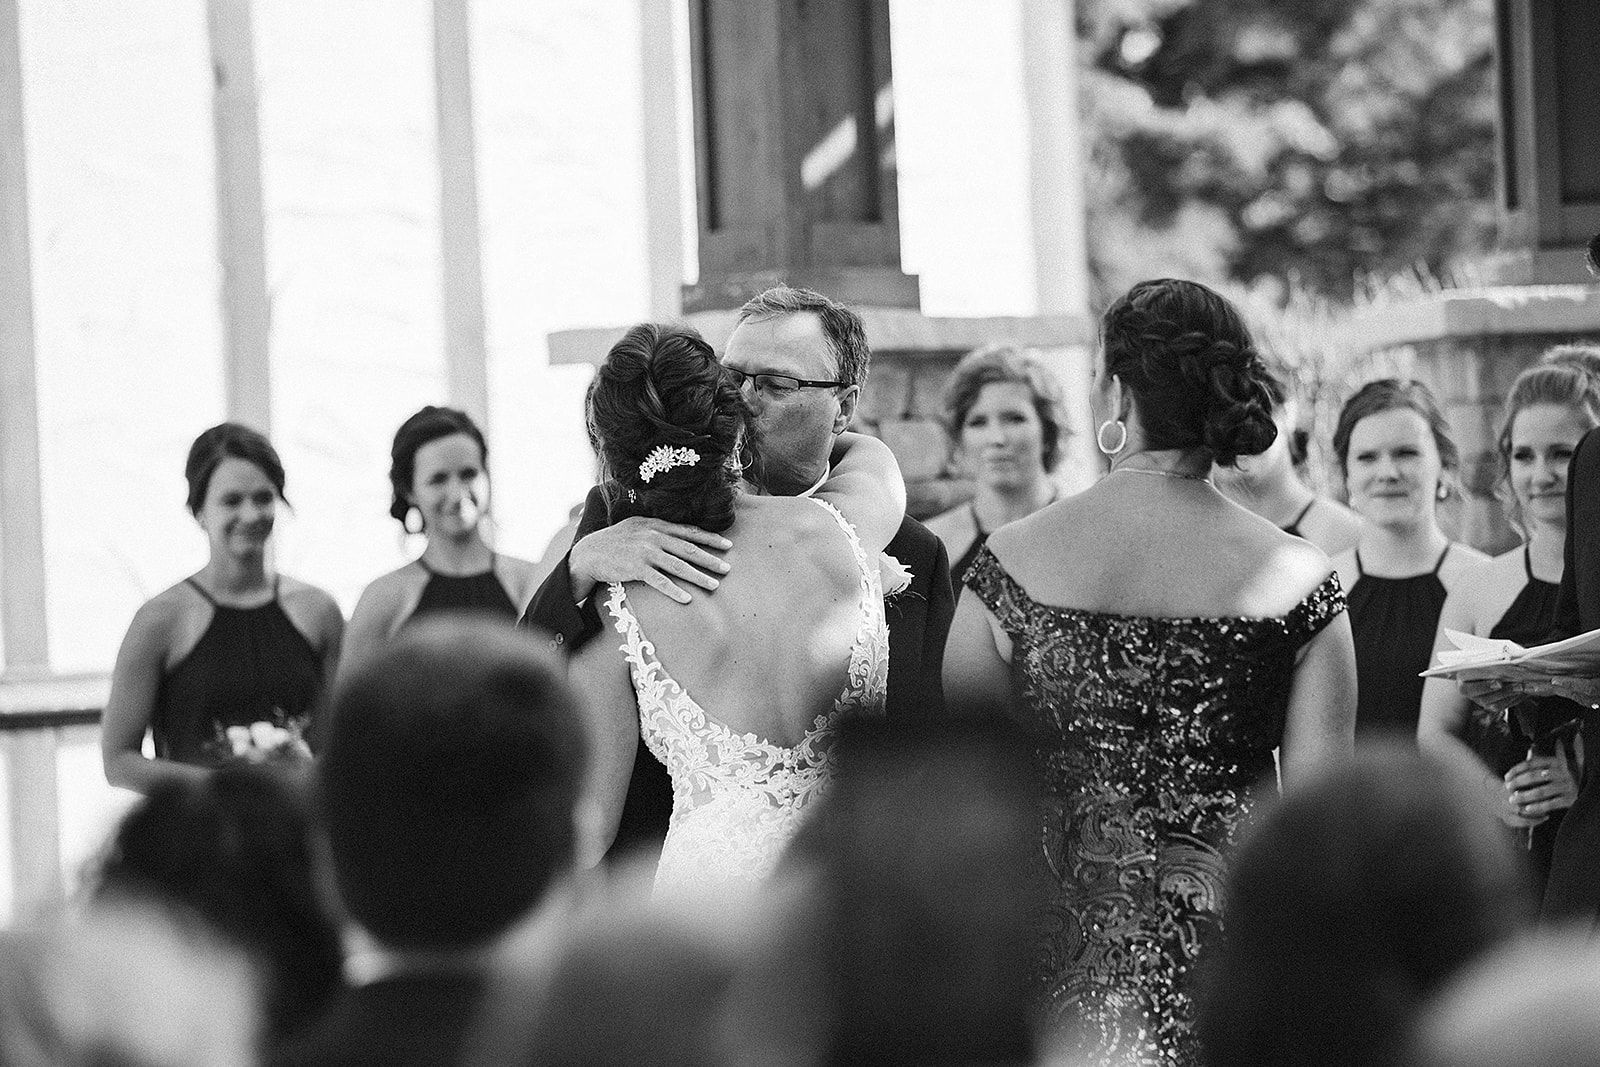 Chicago wedding photography, Chevy Chase Country Club Wedding, Chicago country club wedding, Chicago weddings, Chicago photographers, wedding photography Chicago, wedding venues Chicago, Chicago wedding venues, Chicago wedding reception, Chicago engagement photos, downtown Chicago photo session, Chicago wedding ideas, Chicago Wedding Photographer, Marissa Roberts Photography, wedding photographers near Chicago IL, wedding photography Cook County IL, Wedding photography Lake County IL, Chicago IL